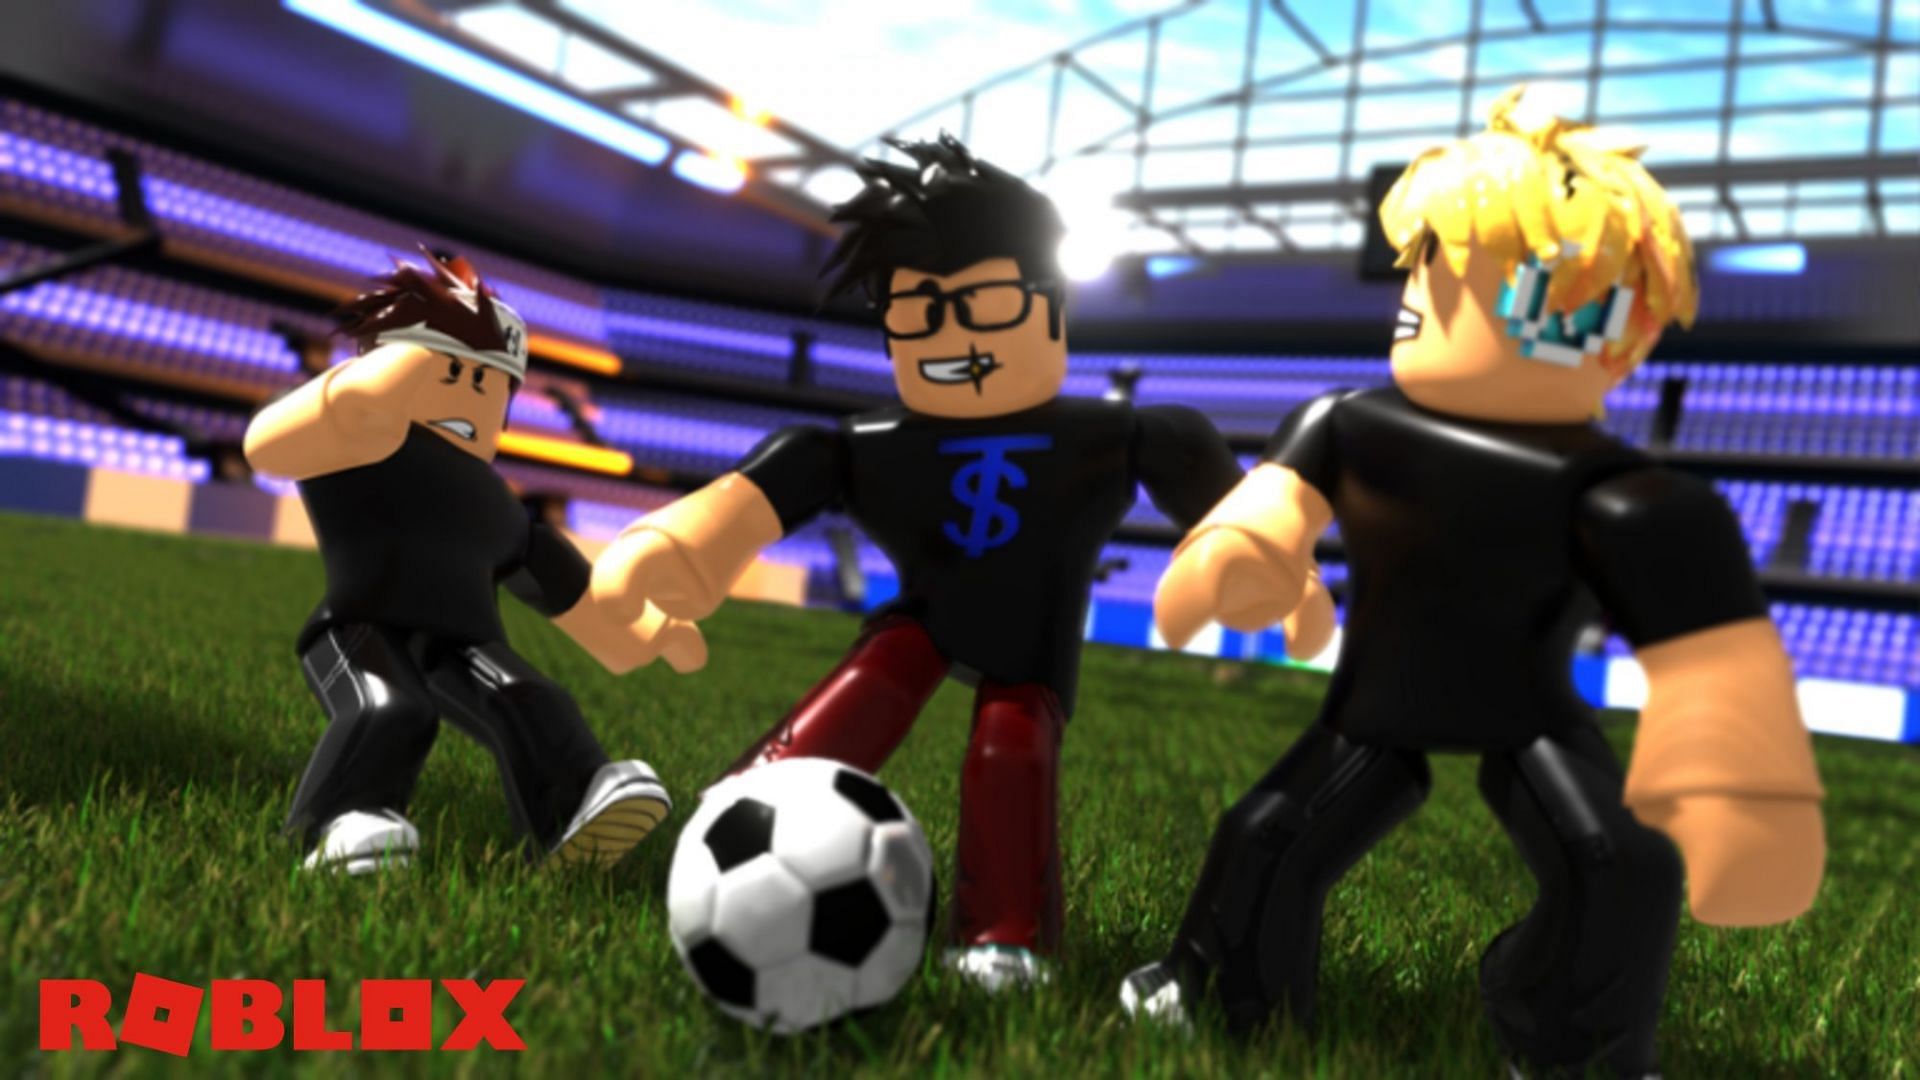 Roblox games for football fans to check out (Image via Roblox)